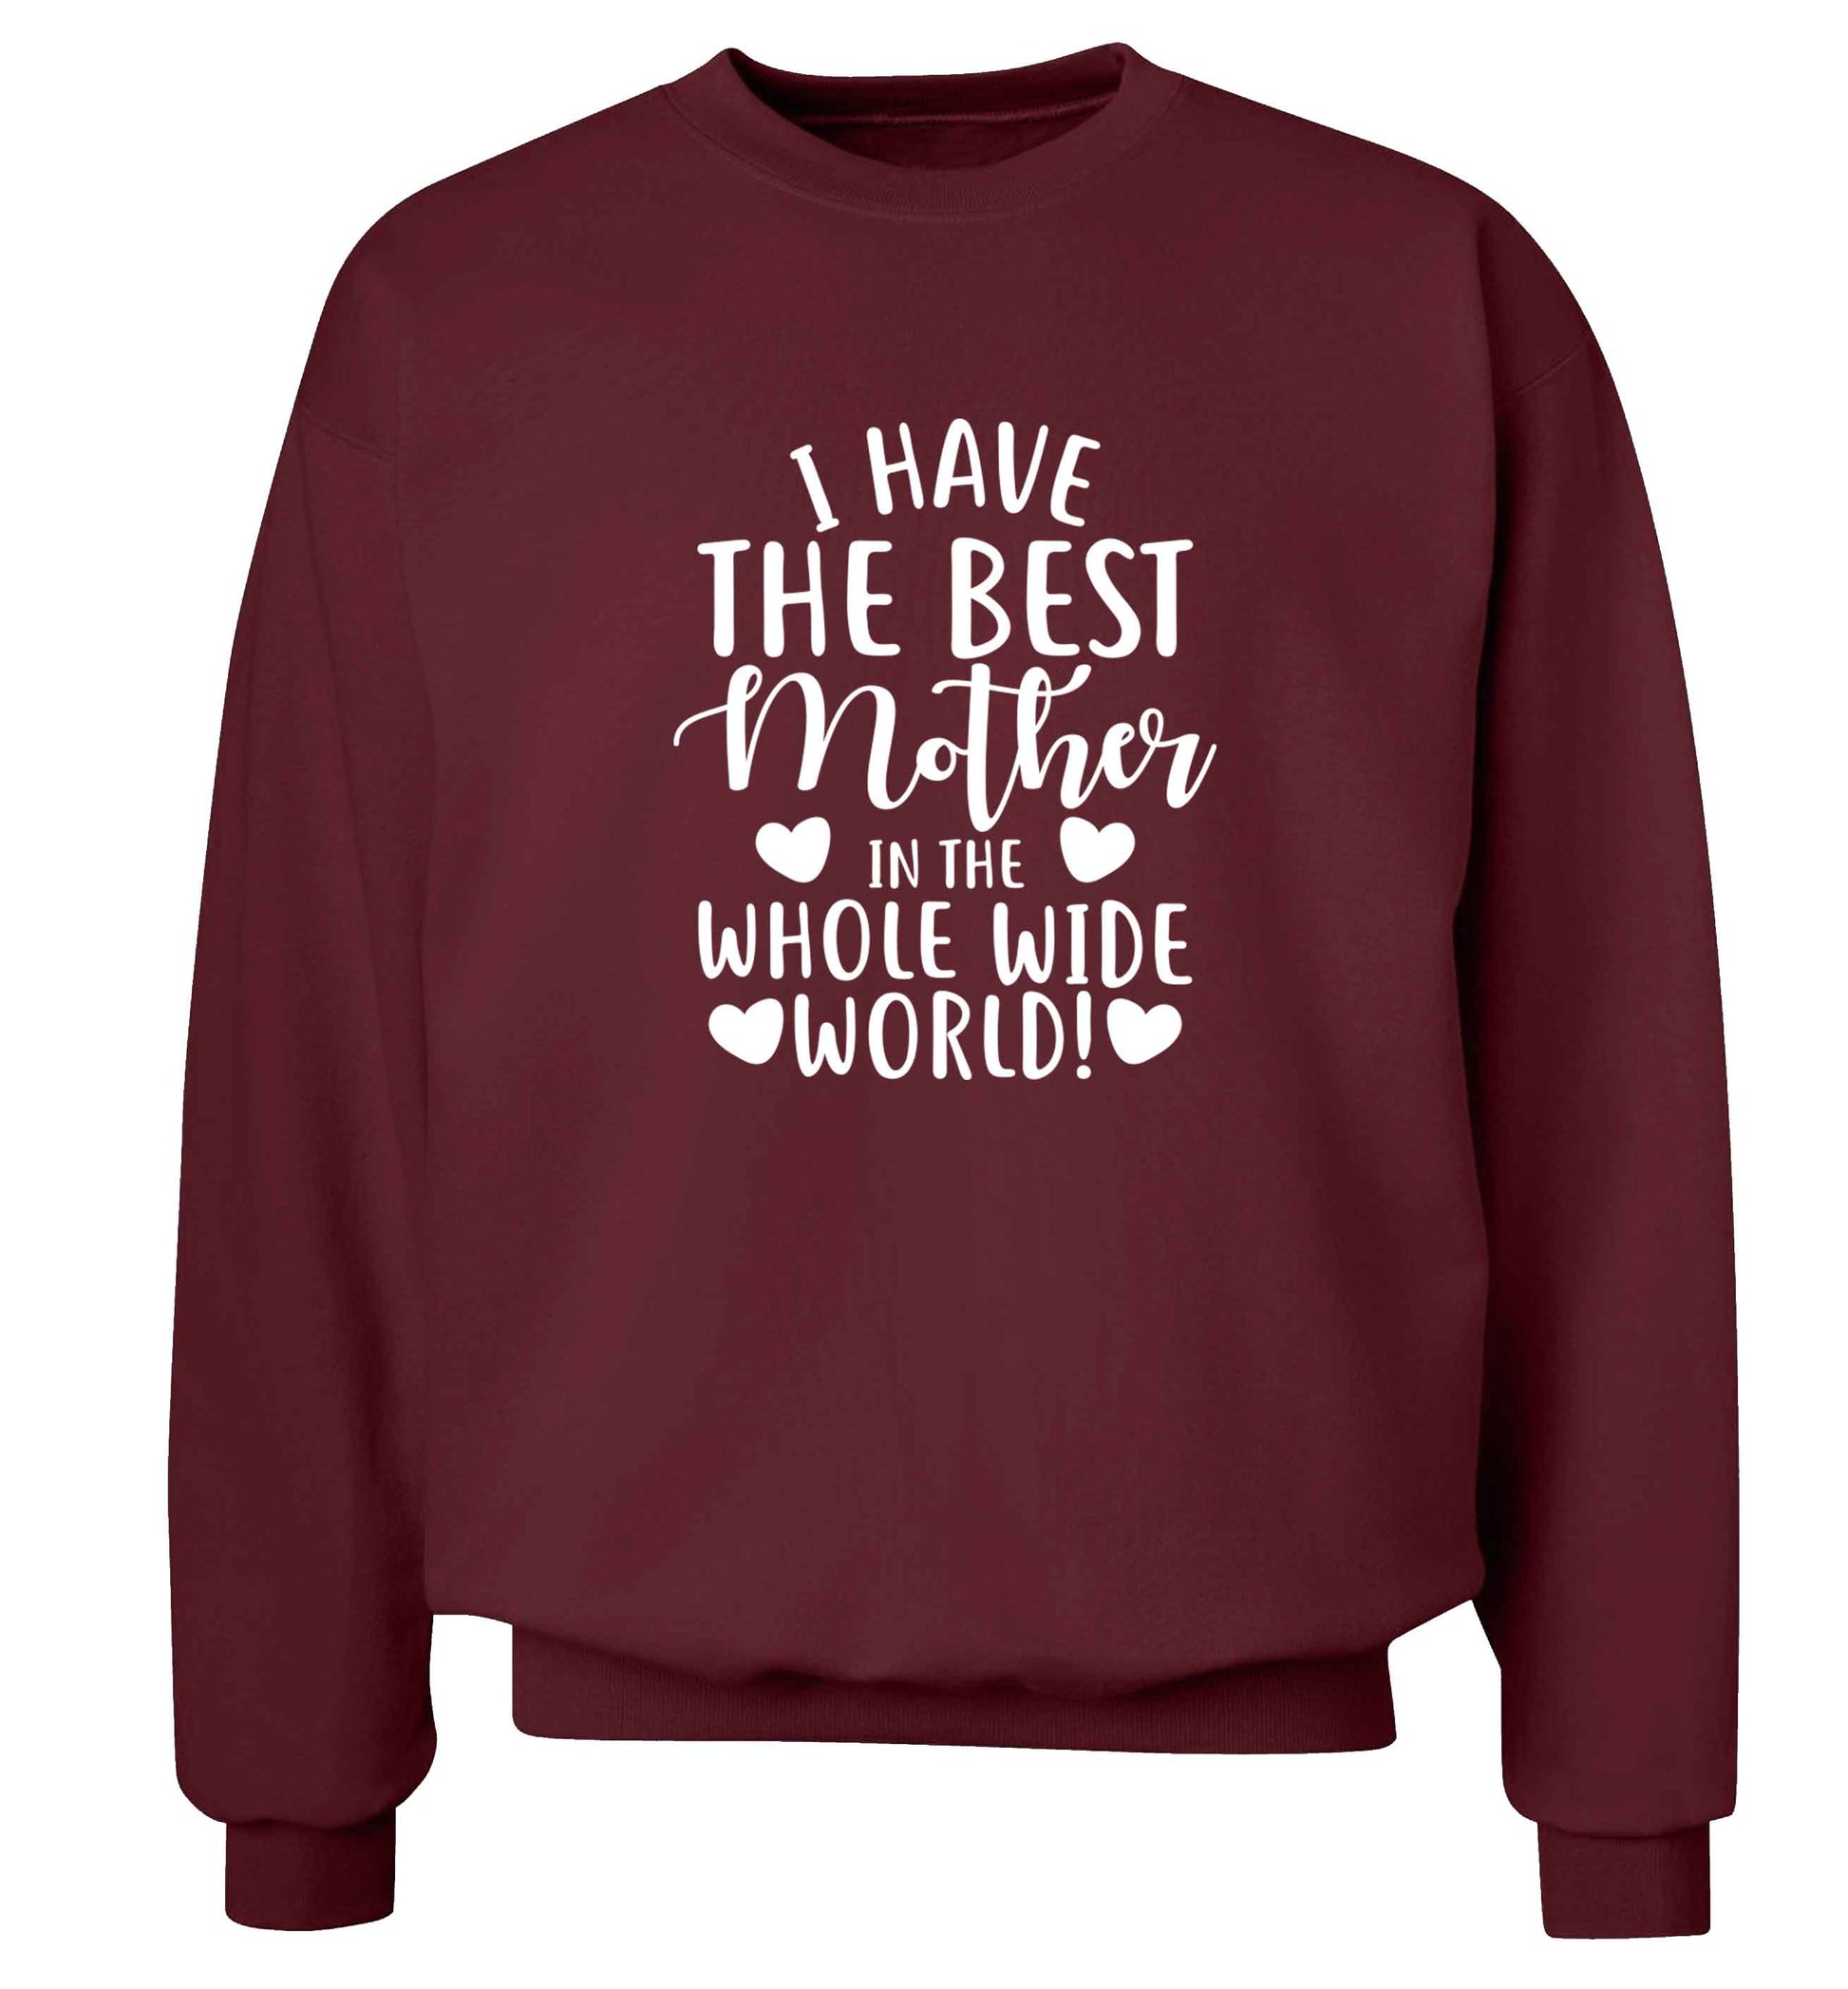 I have the best mother in the whole wide world adult's unisex maroon sweater 2XL